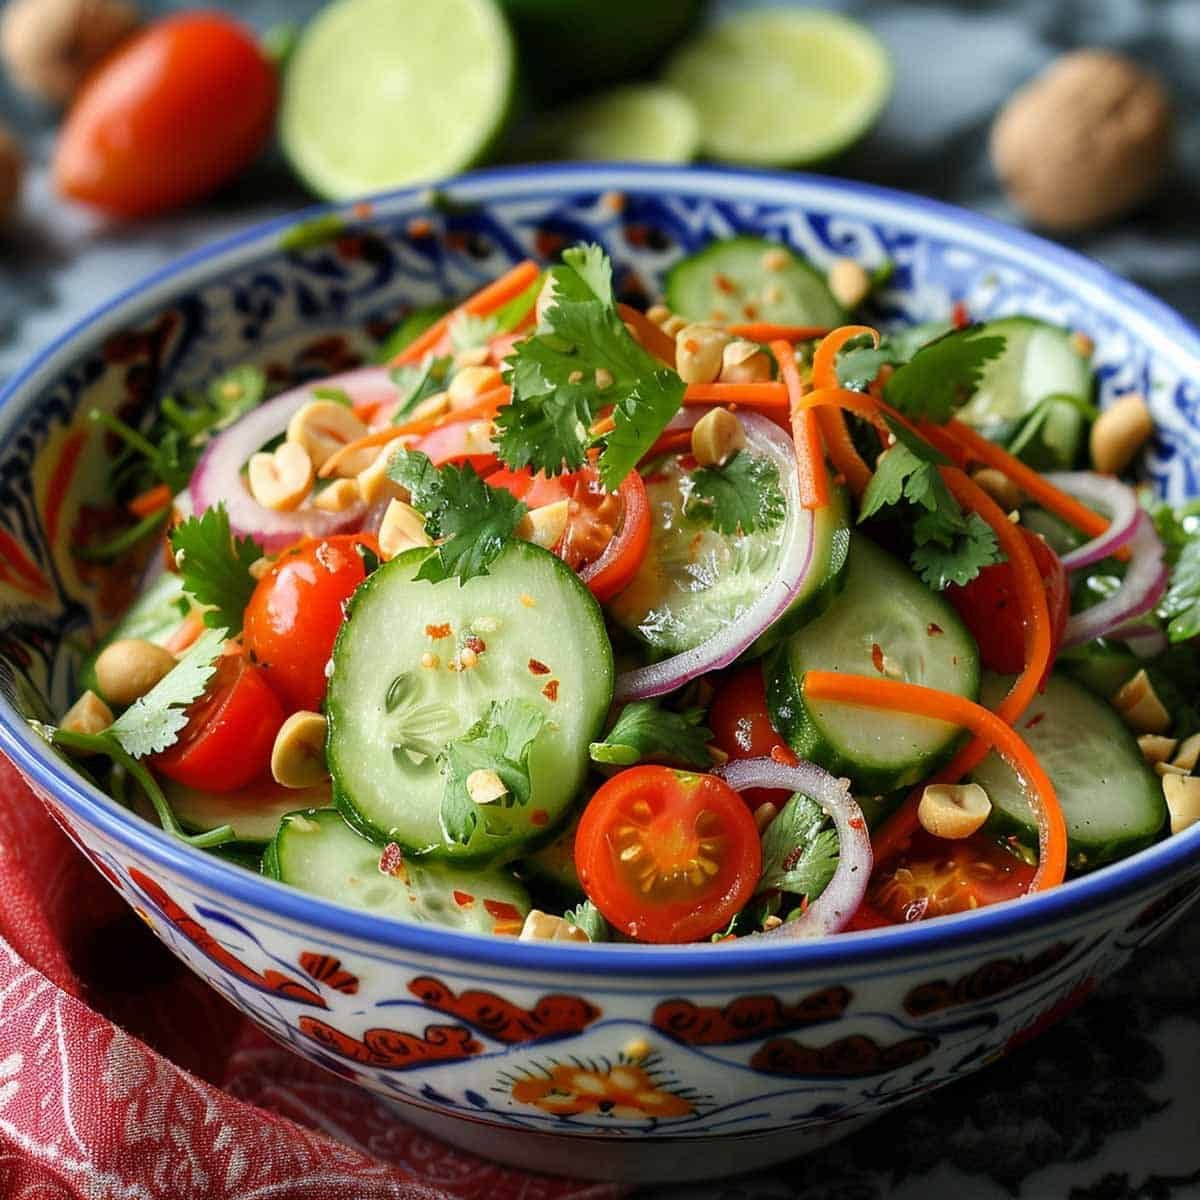 Bowl of fresh Thai Cucumber Salad (Som Tum Tang), featuring cucumbers, tomatoes, peanuts, and chili